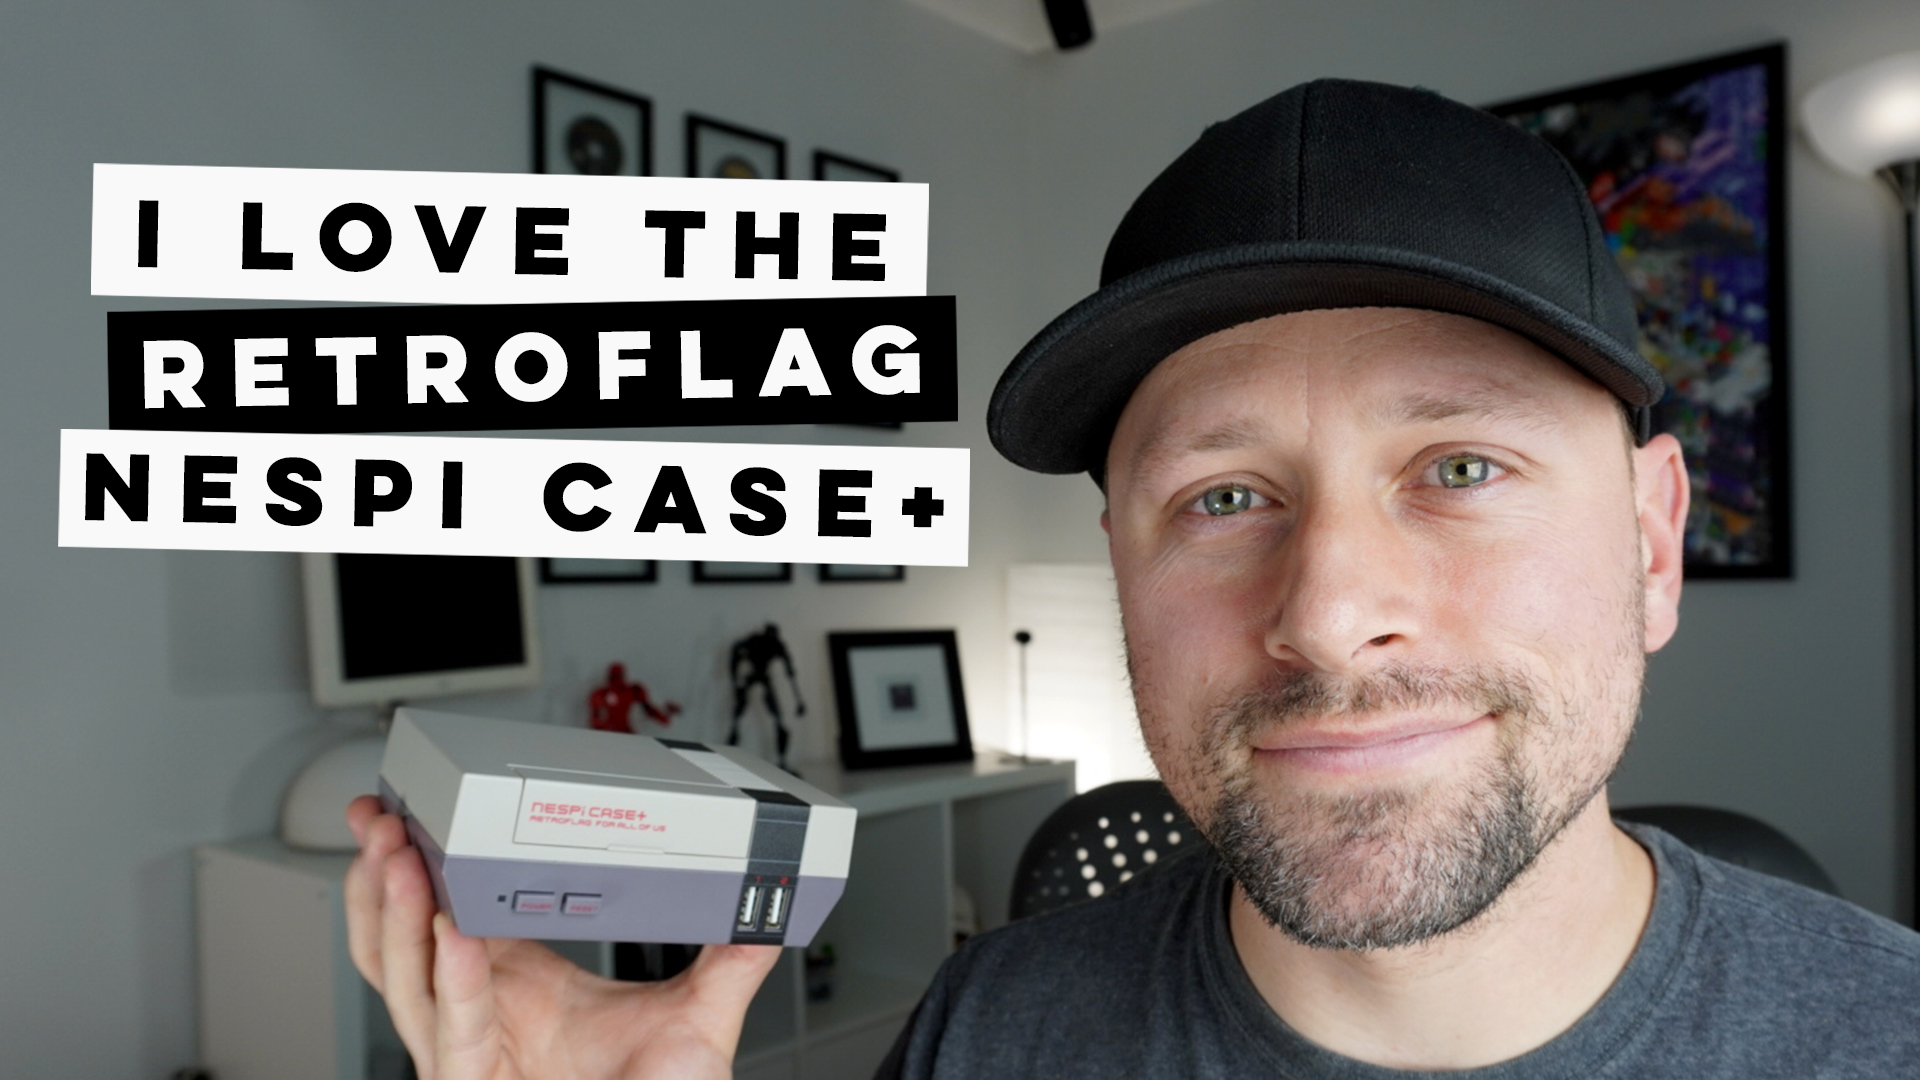 Retroflag NESPi Case+ - The perfect retro gaming device for the whole family?